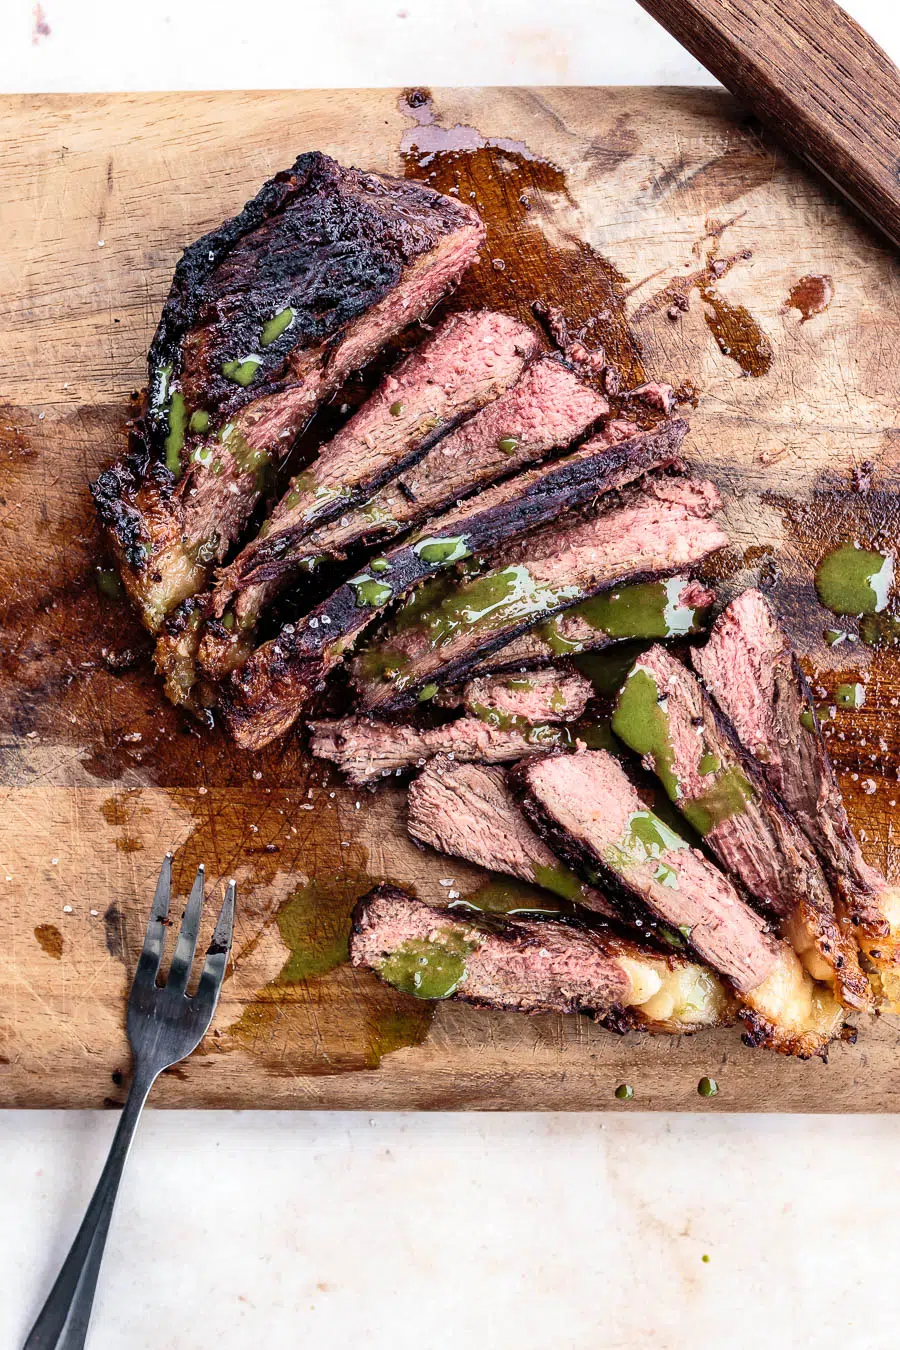 Grilled picanha steak on a cutting board. It is sliced and drizzled in chimichurri sauce.